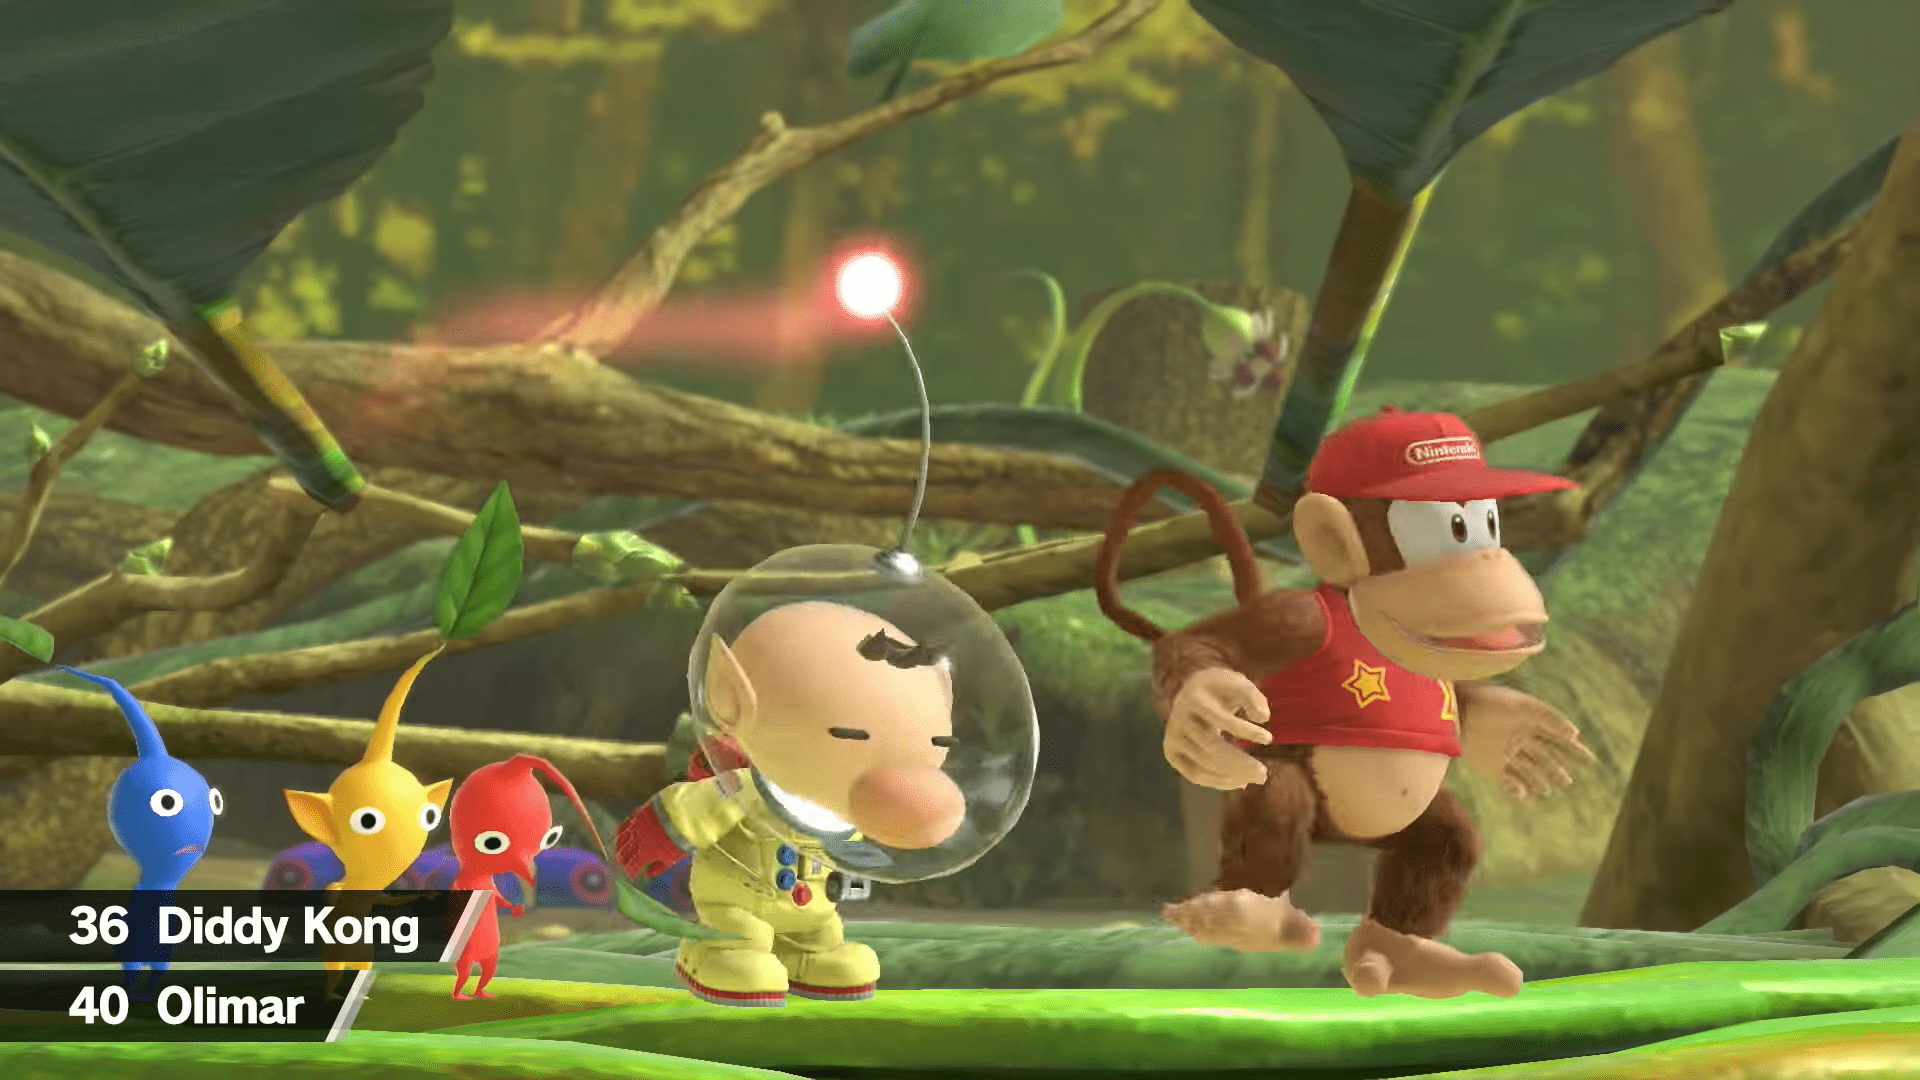 Olimar and Diddy Kong in Smash Ultimate.